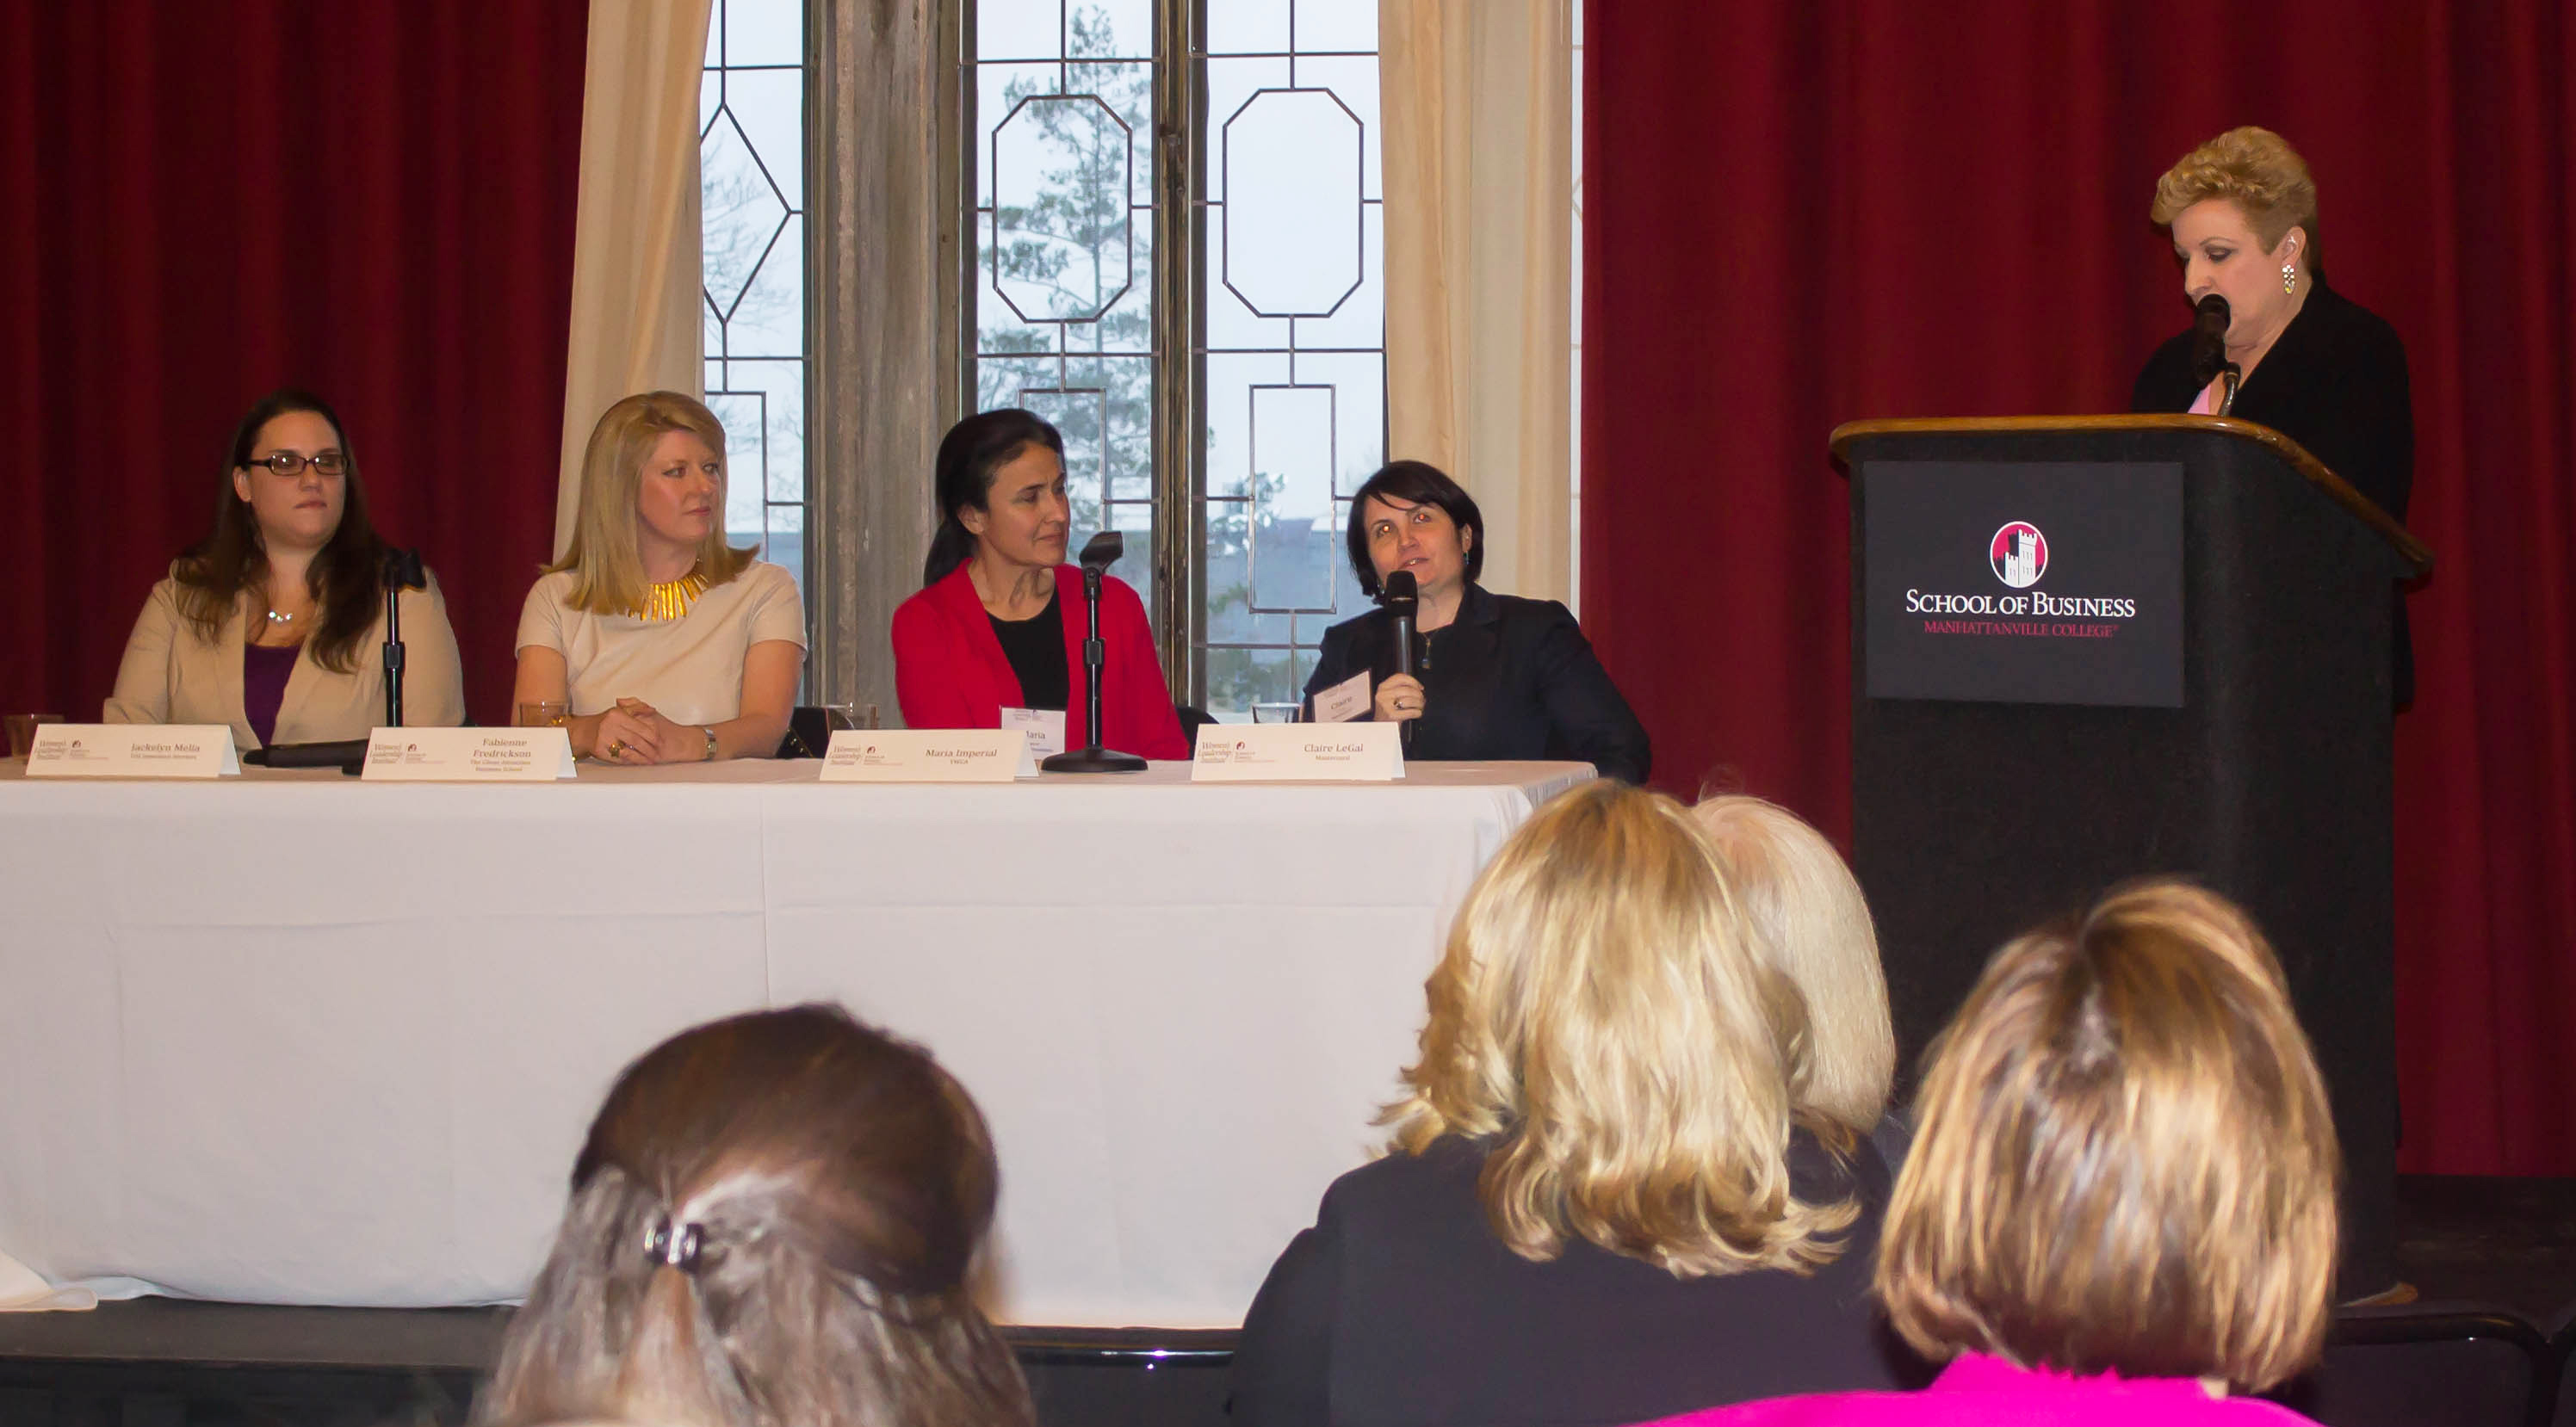 Panelists Jackelyn Melia, Fabienne Fredrickson, Maria Imperial, Clare LeGal, and moderator Janine Rose.